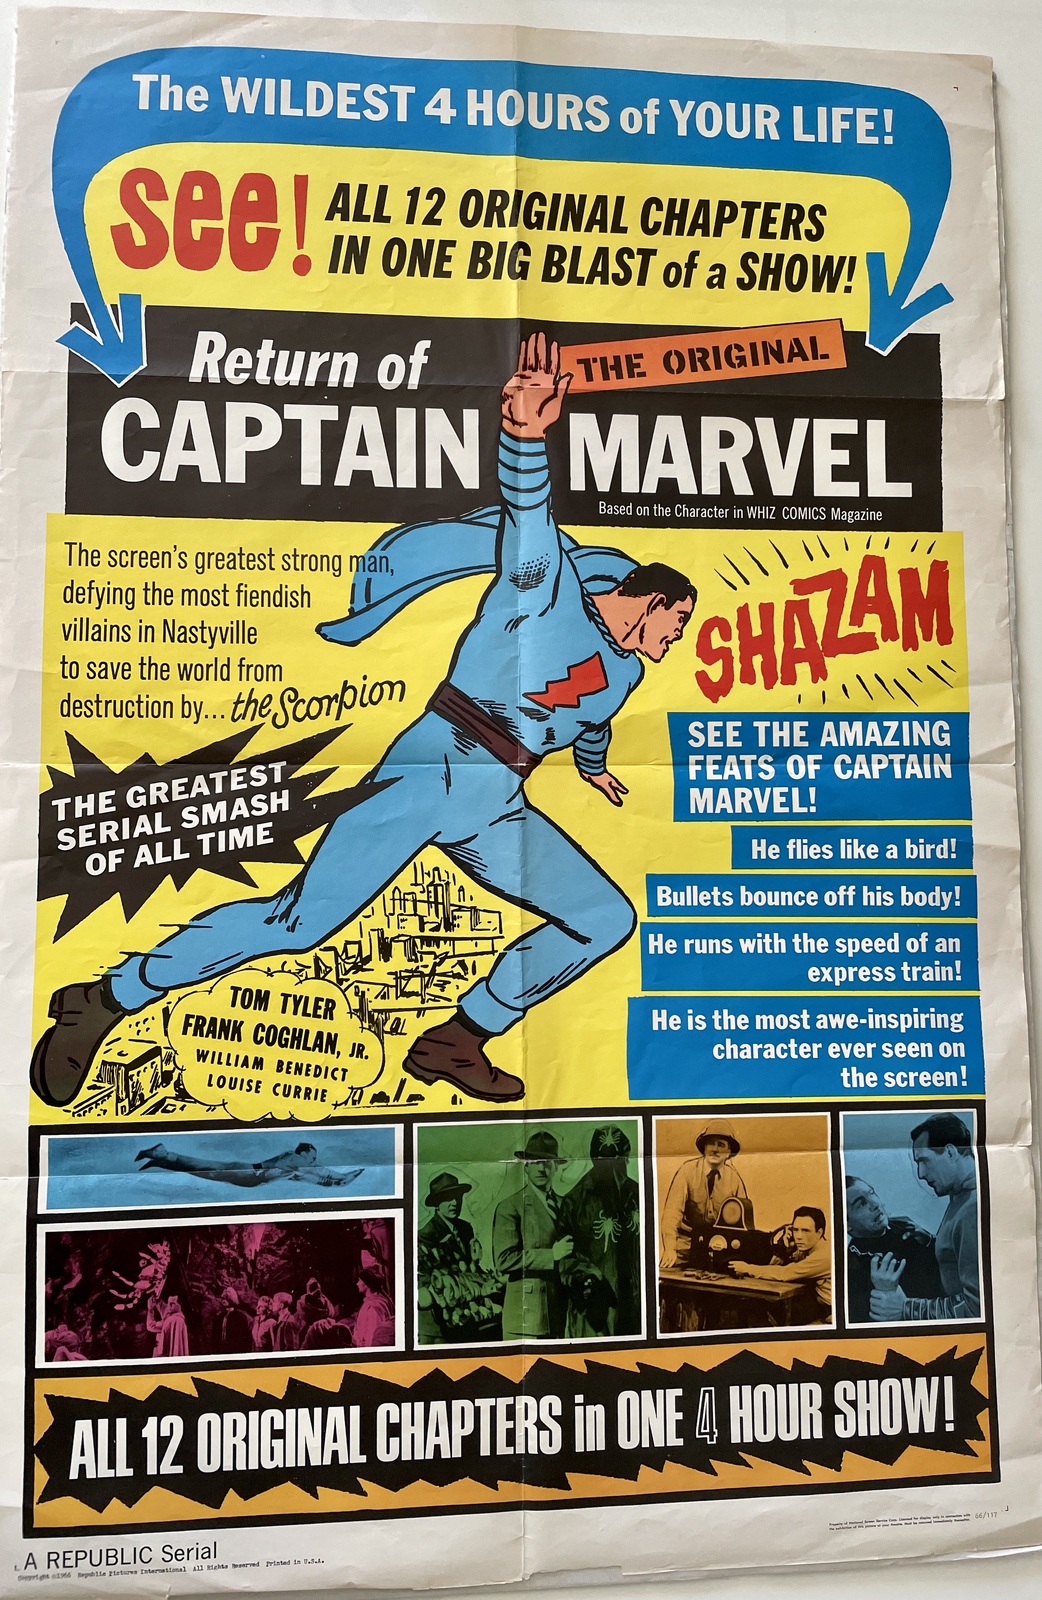 Primary image for Captain Marvel vintage comic poster 